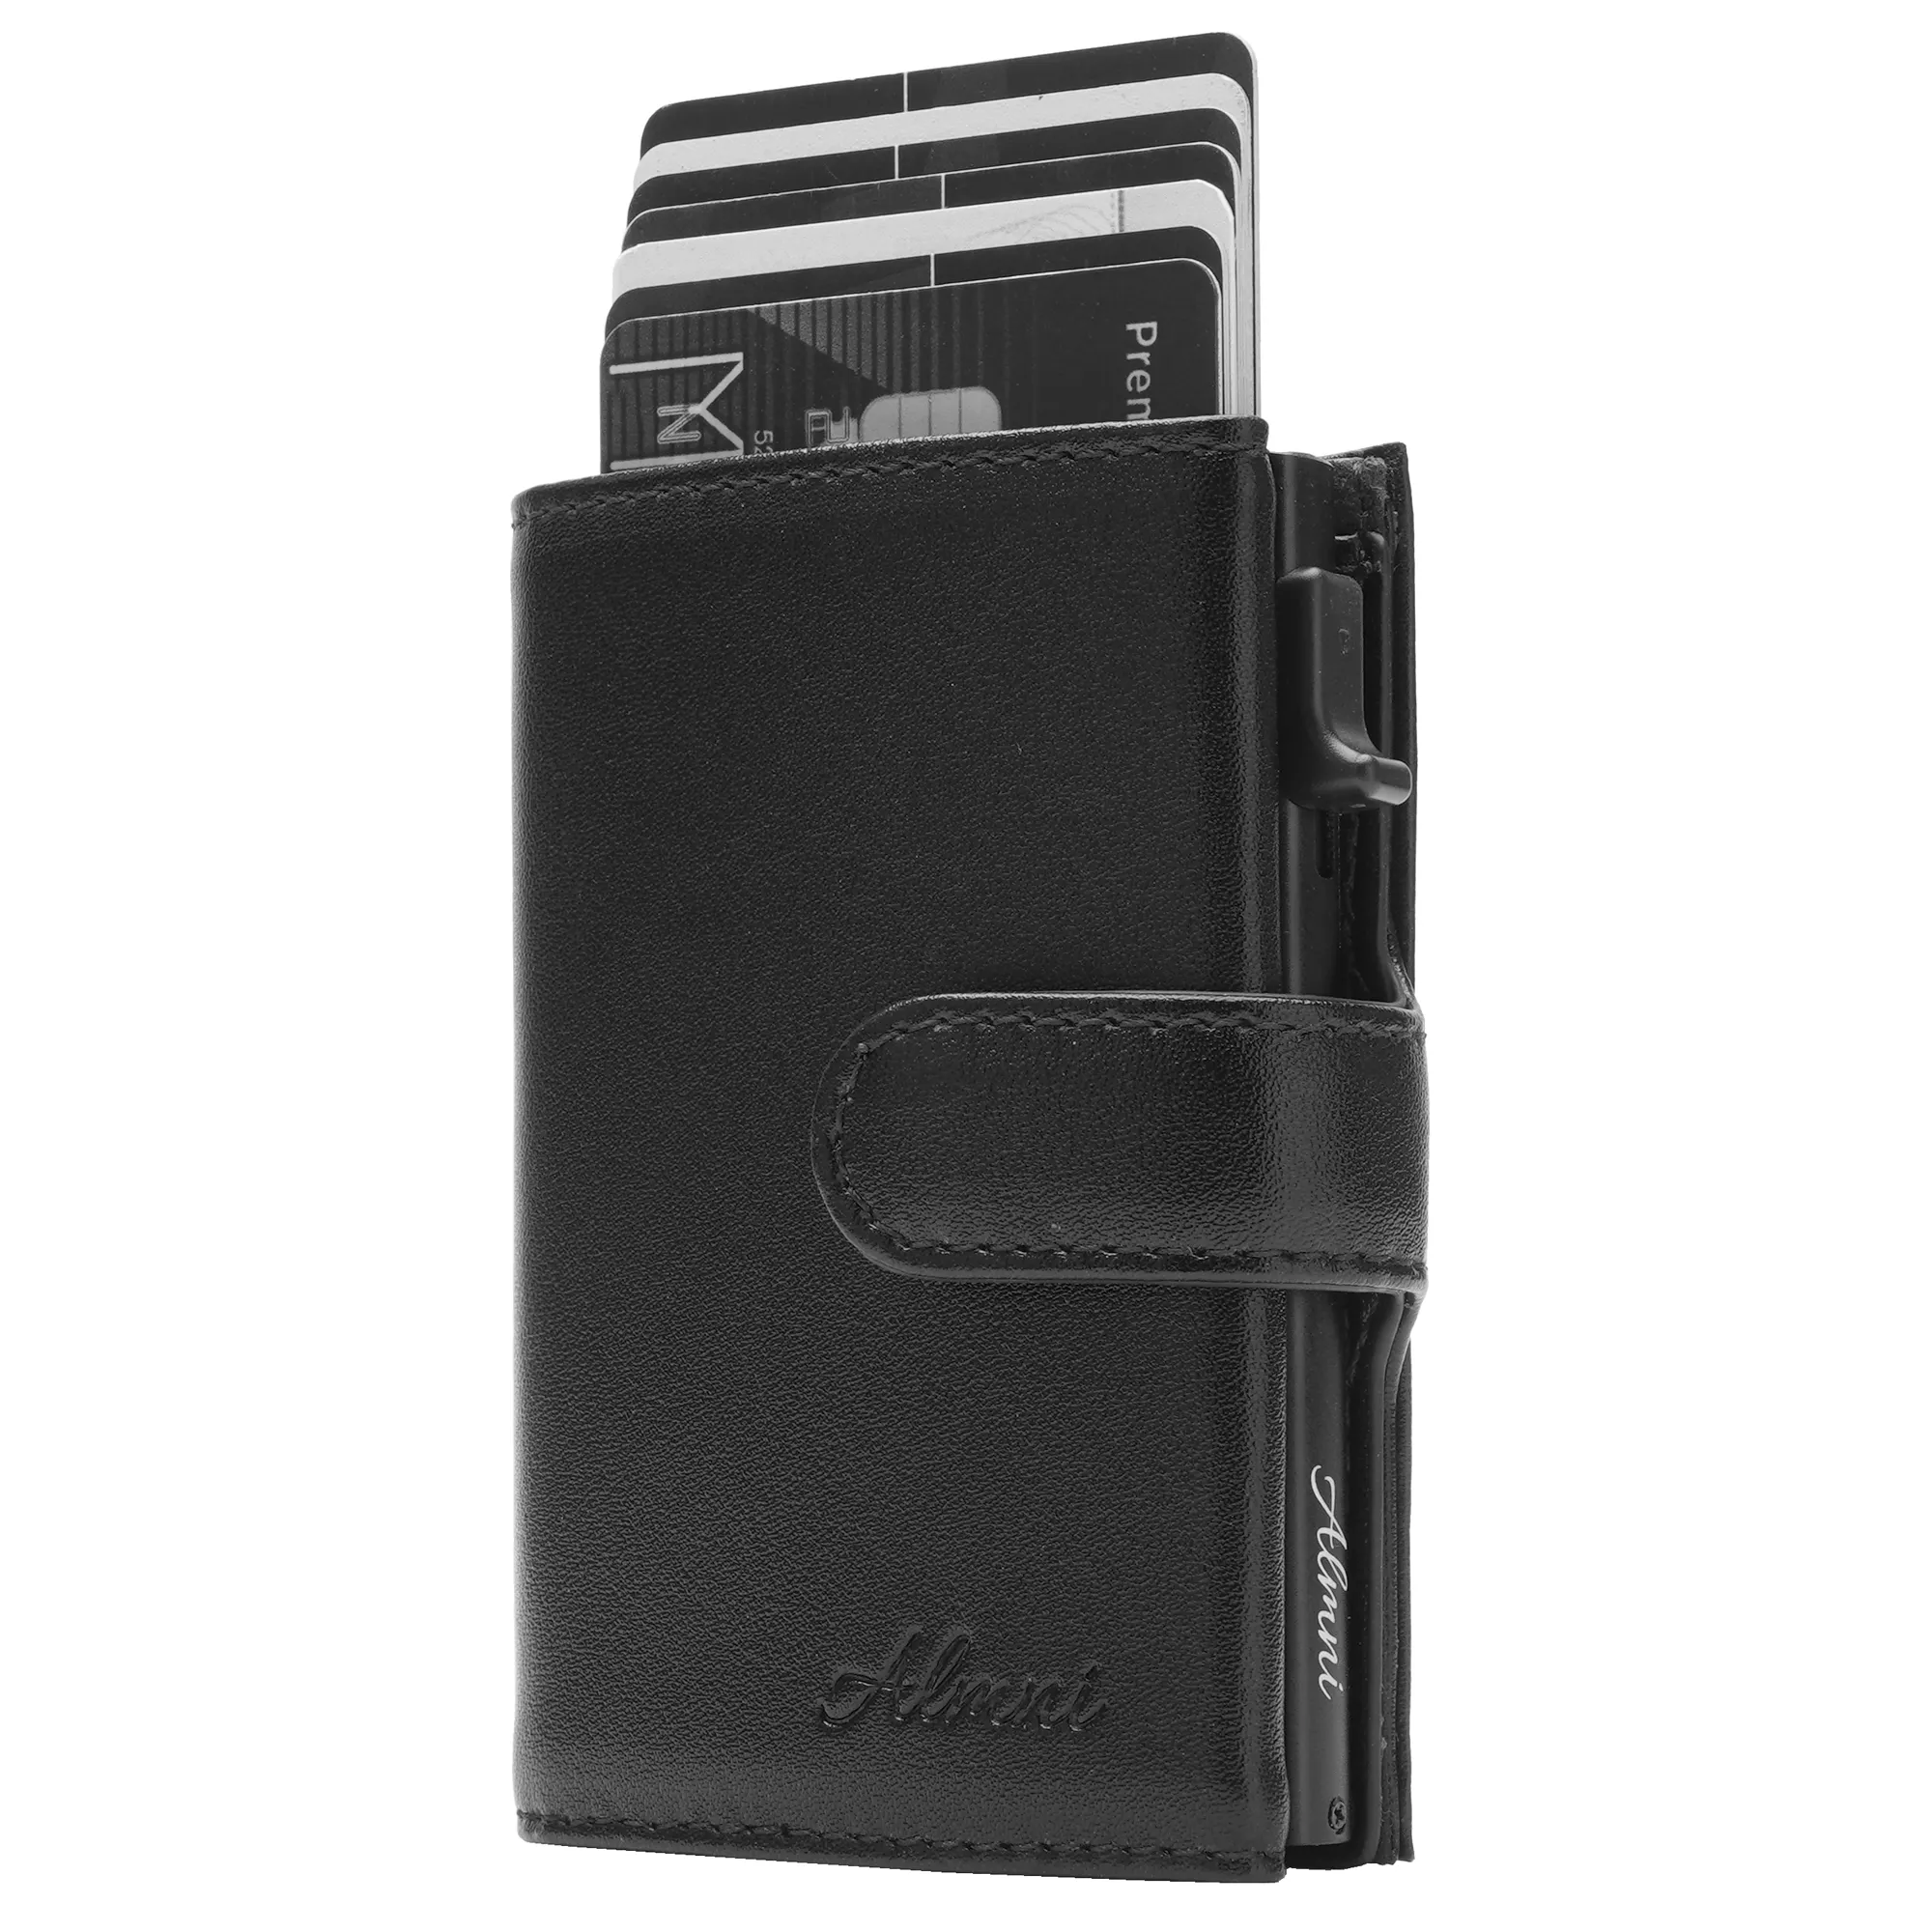 Wallet Mens Slim Wallet With Aluminum Case RFID Blocking Bifold Credit Card Holder For Men With Gift Box